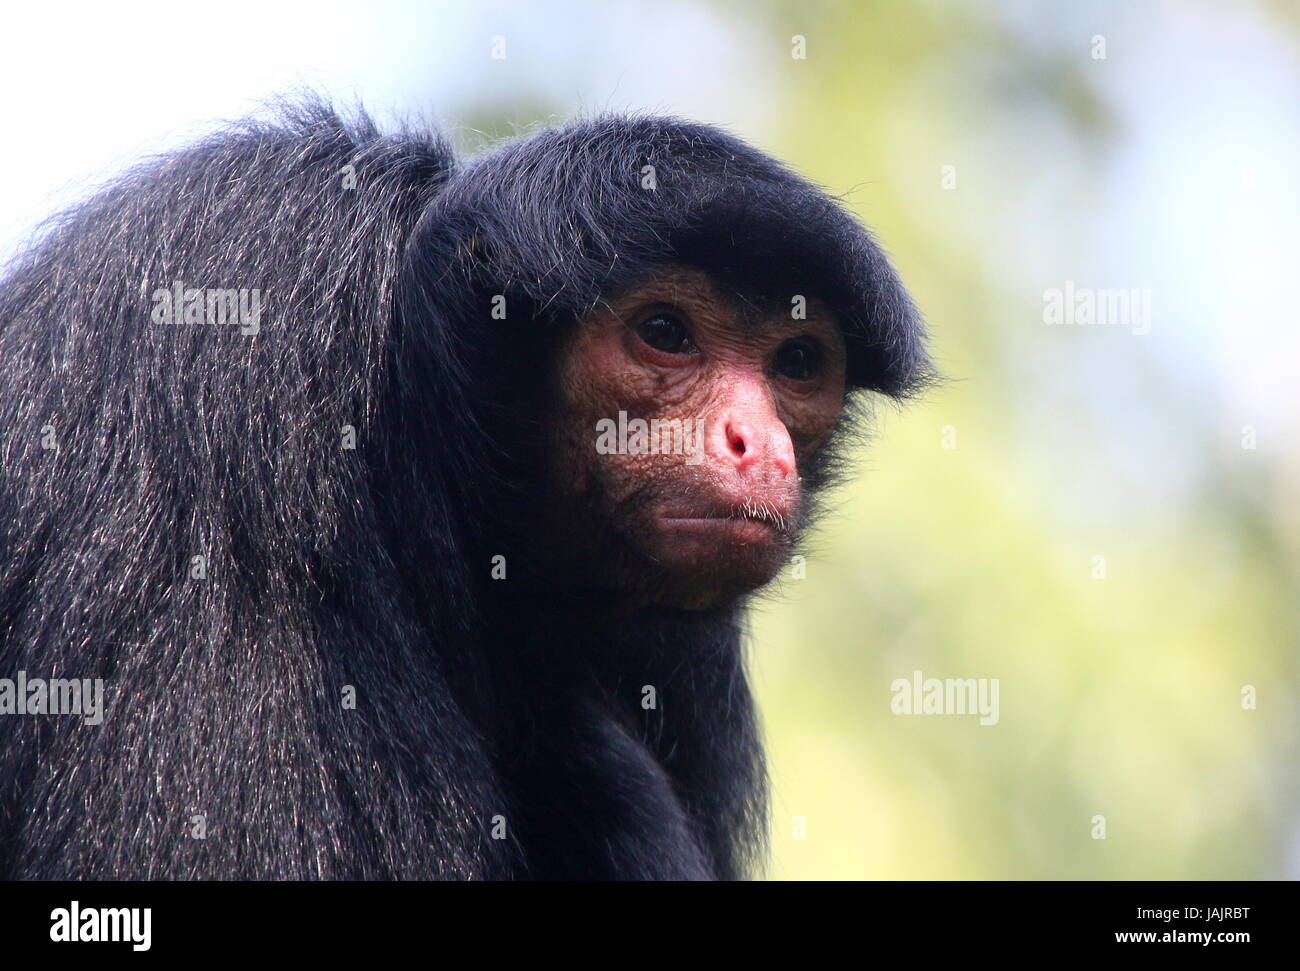 South American Red Faced Black Spider Monkey (Ateles paniscus) a.k.a. Guiana spider monkey. Stock Photo